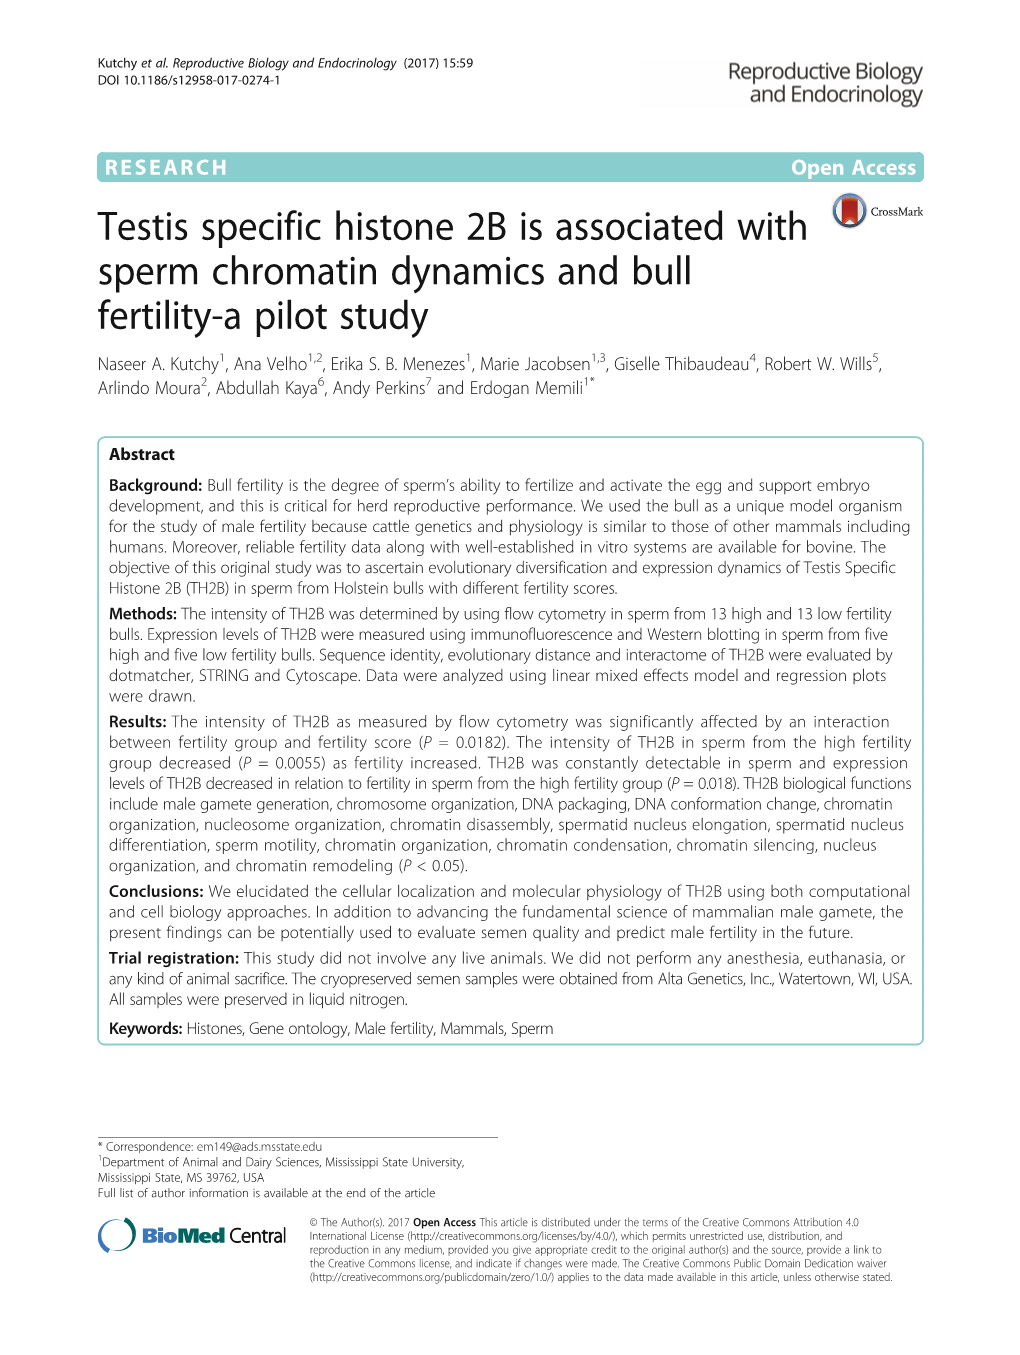 Testis Specific Histone 2B Is Associated with Sperm Chromatin Dynamics and Bull Fertility-A Pilot Study Naseer A